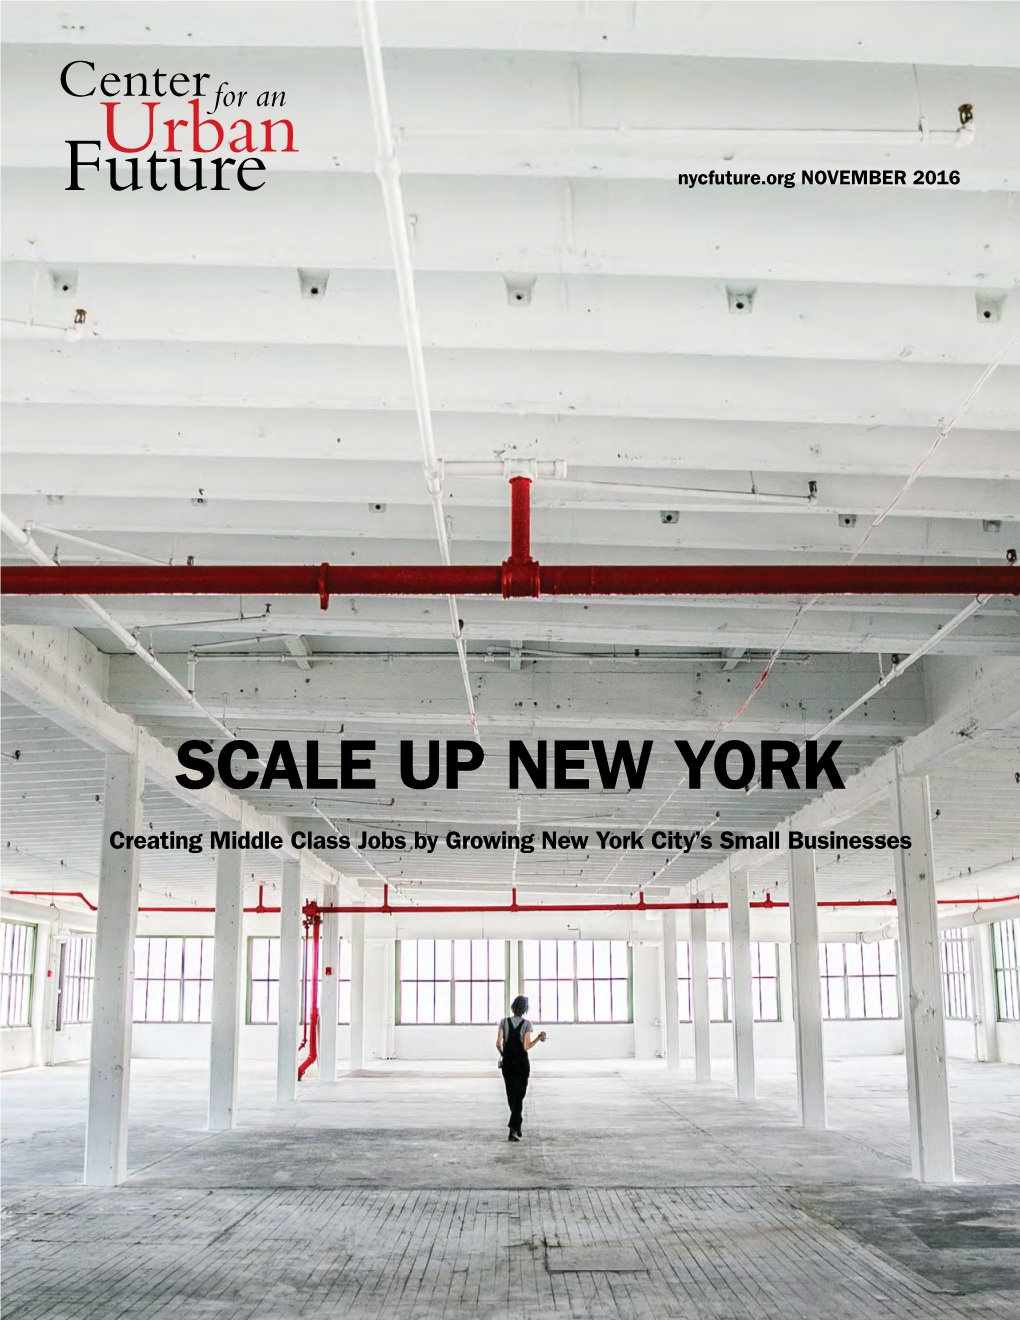 Scale up New York